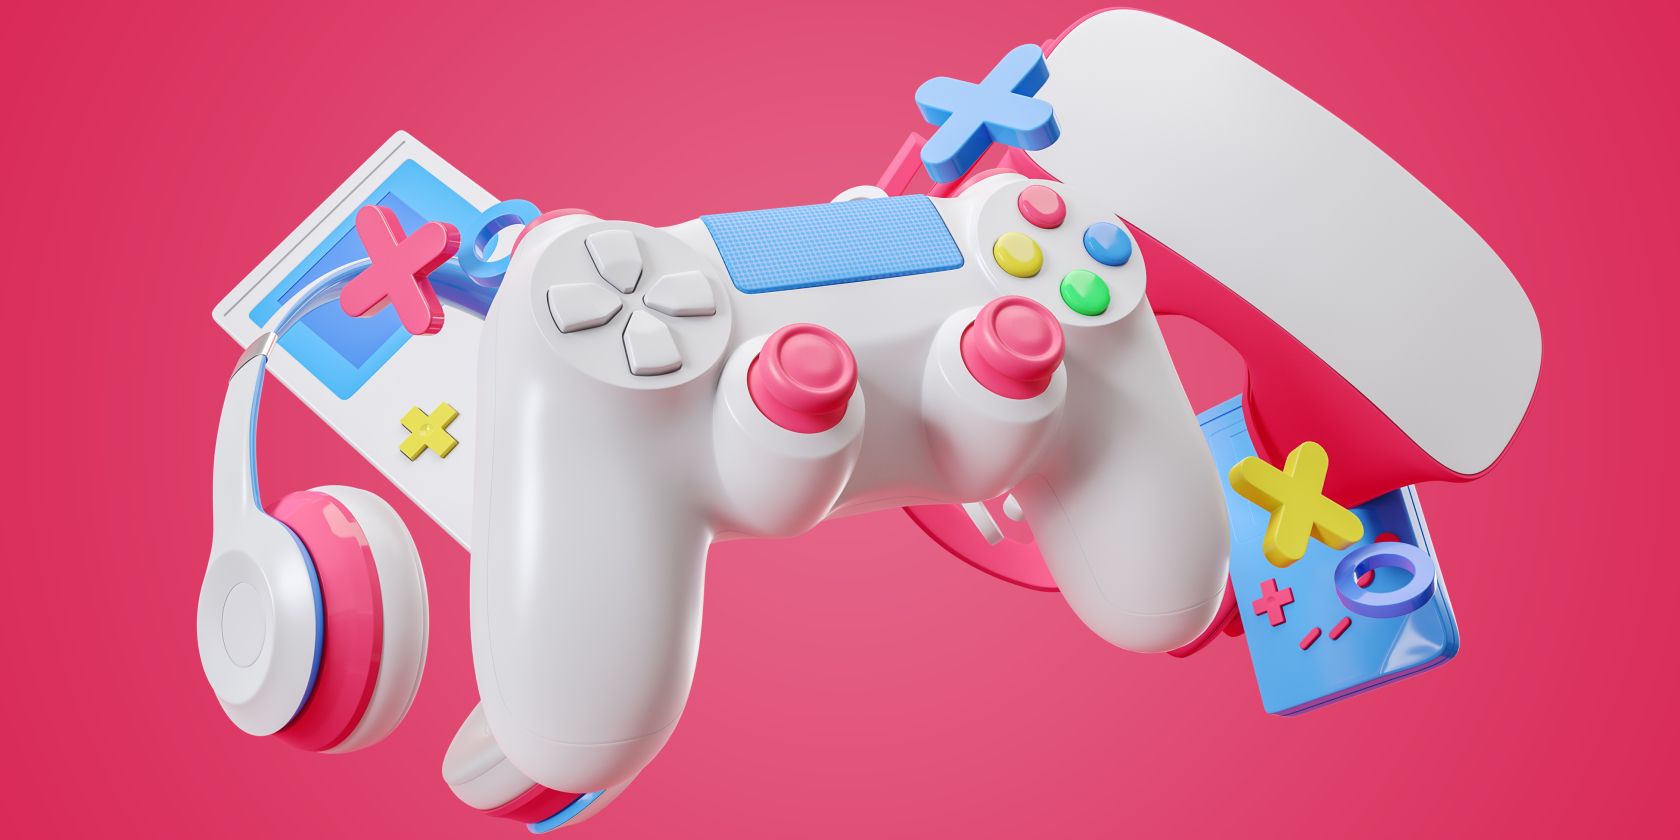 gamepad, headphones, and game console on a pink background